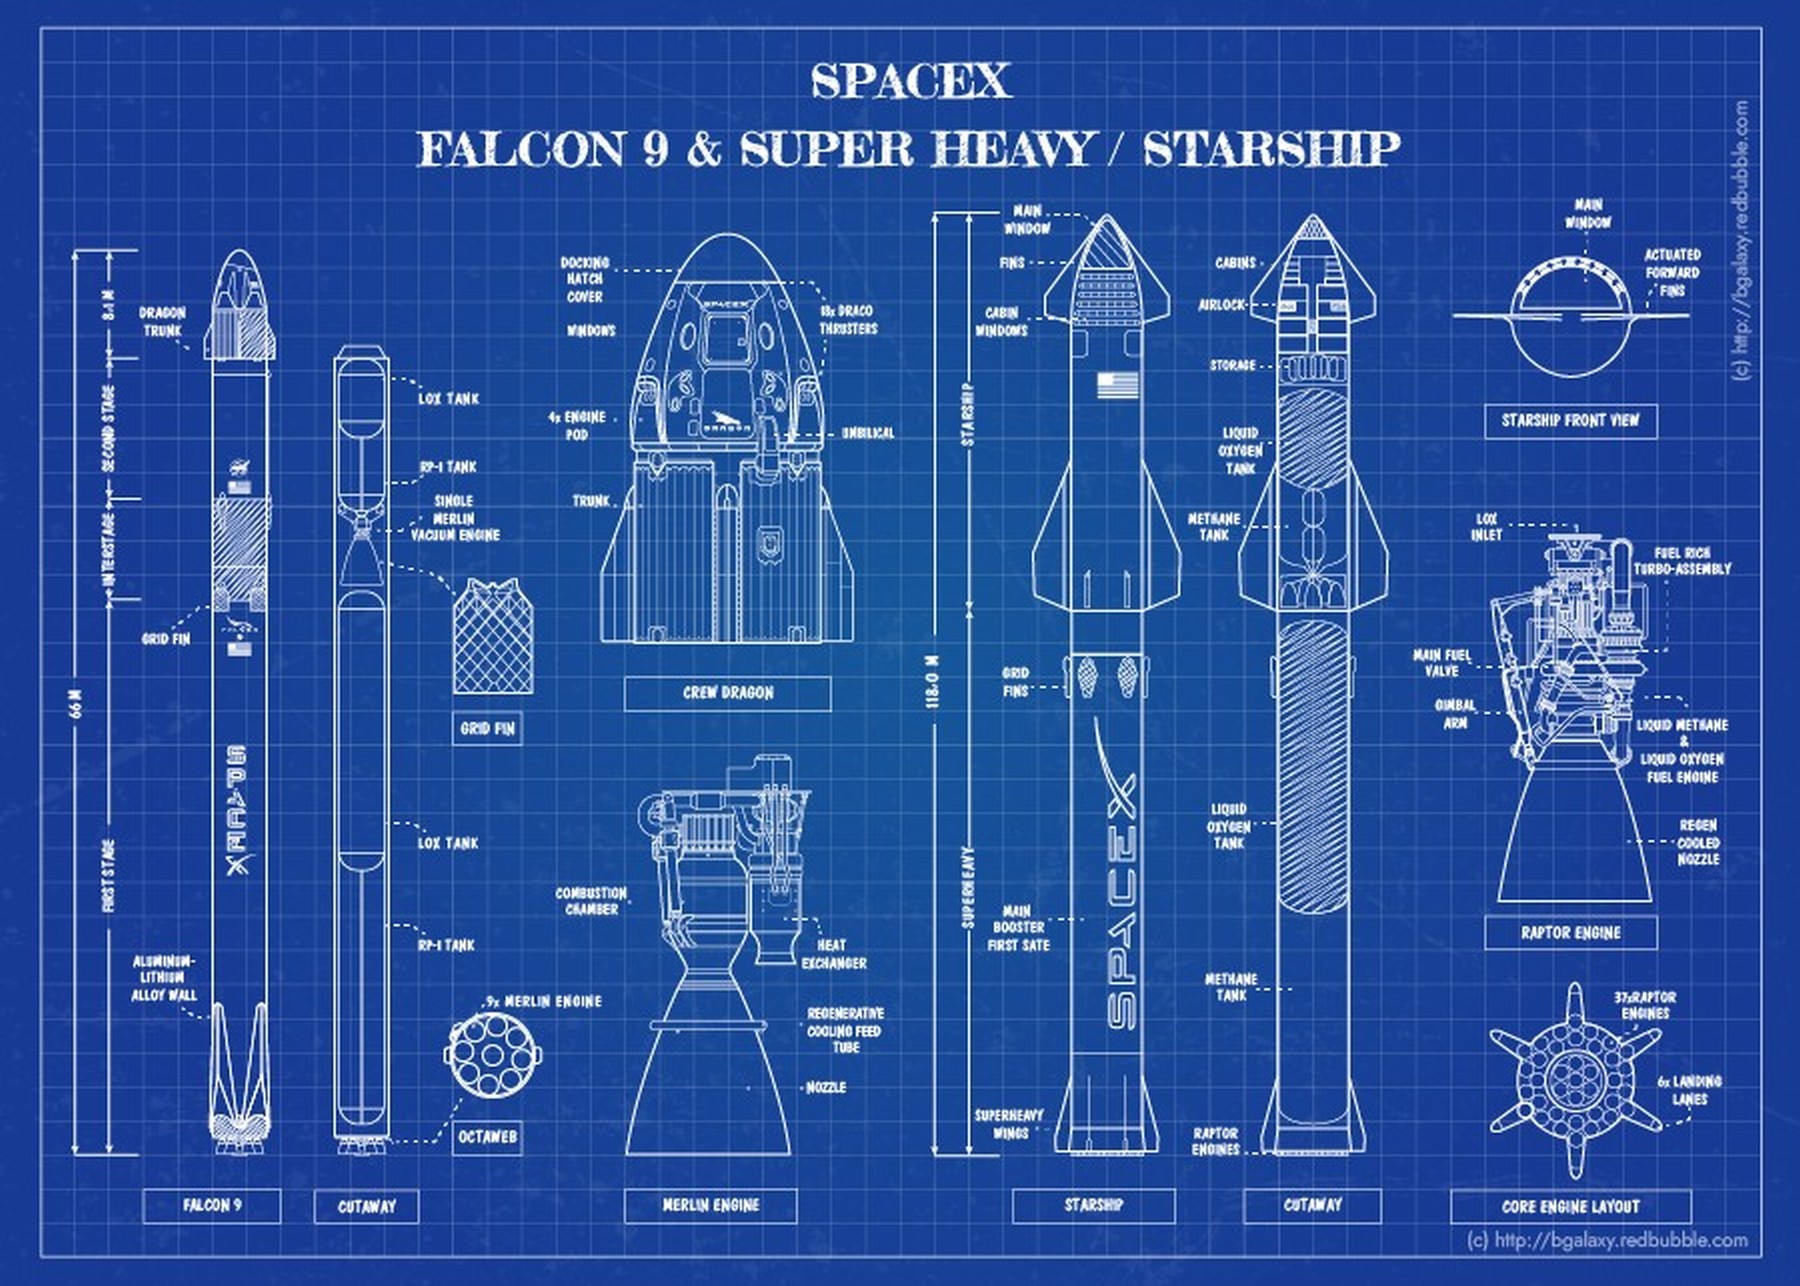 Hackers Stole SpaceX Blueprints, Threatened to Sell Them to the Highest ...